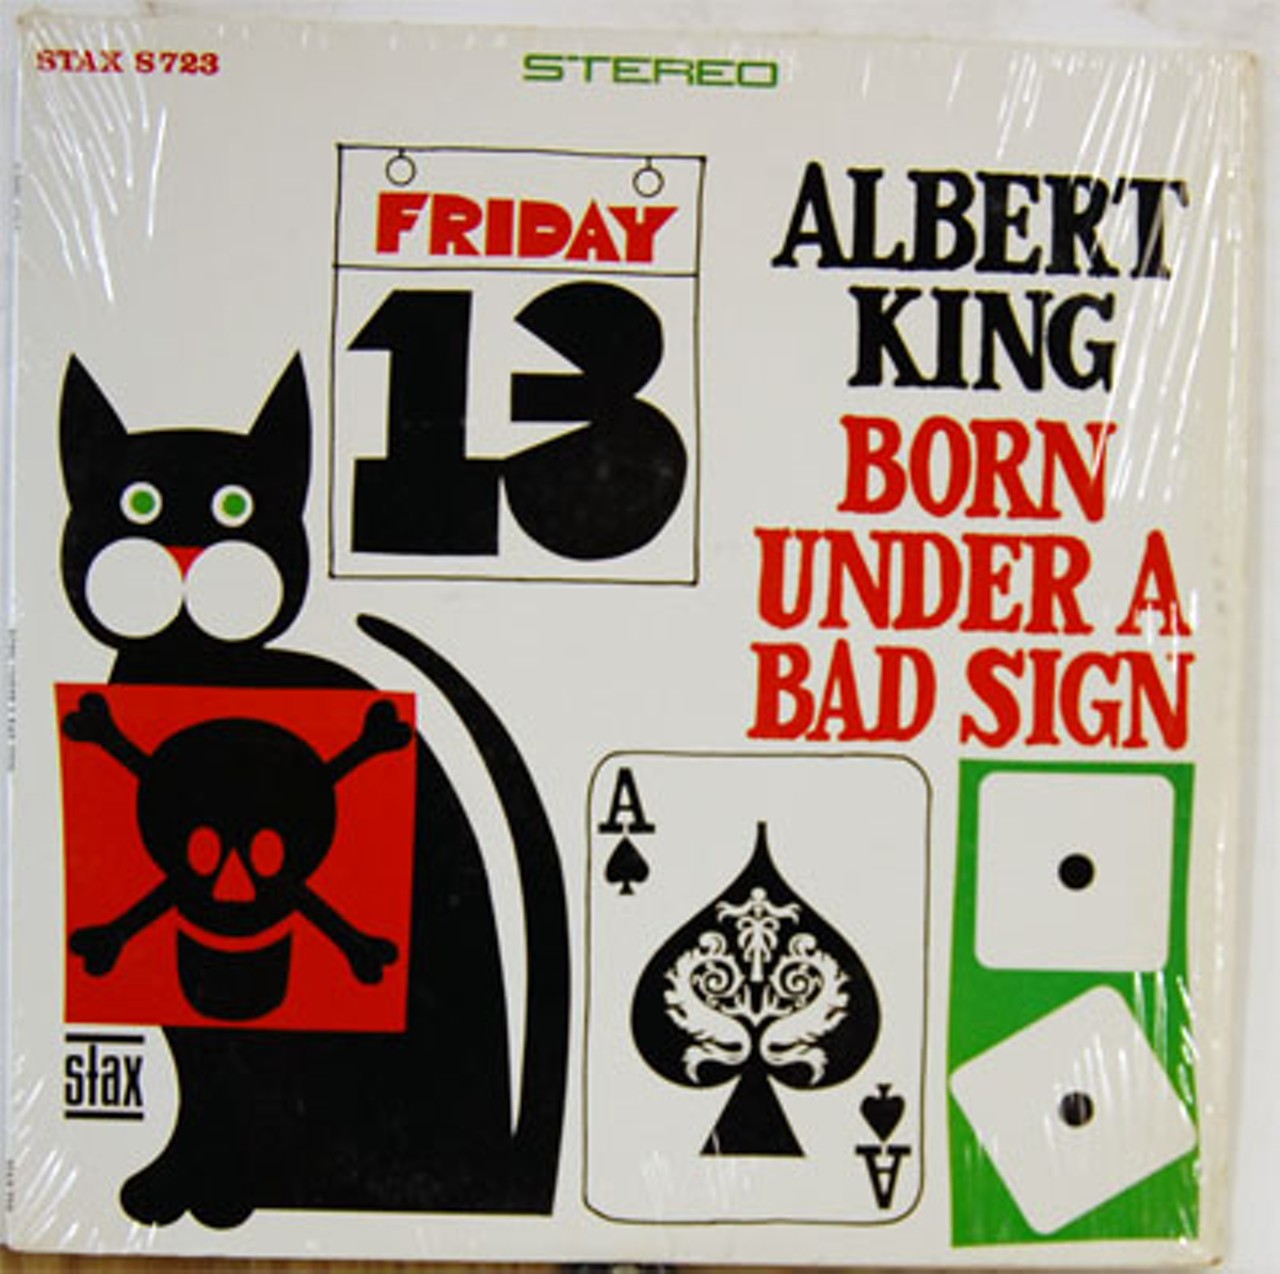 Albert King's Born Under a Bad Sign has all the signs of shitty luck -- black cats, skull & cross bones, Friday the 13th, the ace of spades and snake eyes. And who hasn't had those kind of days?Read "Voices Carry: Shirley Brown, the forgotten soul sister, sings on," by Roy Kasten.